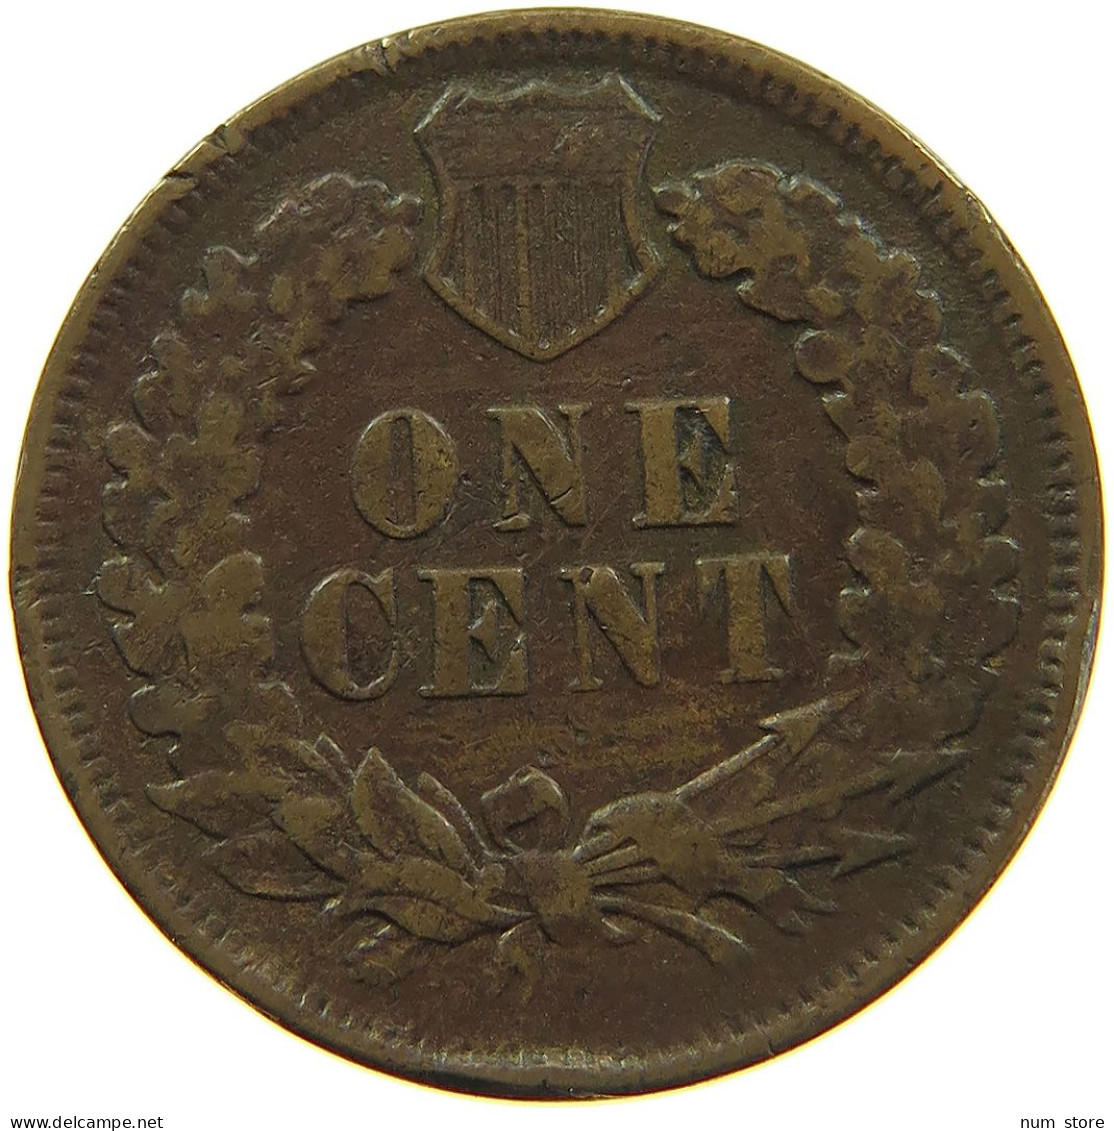 UNITED STATES OF AMERICA CENT 1901 INDIAN HEAD #s091 0365 - 1859-1909: Indian Head